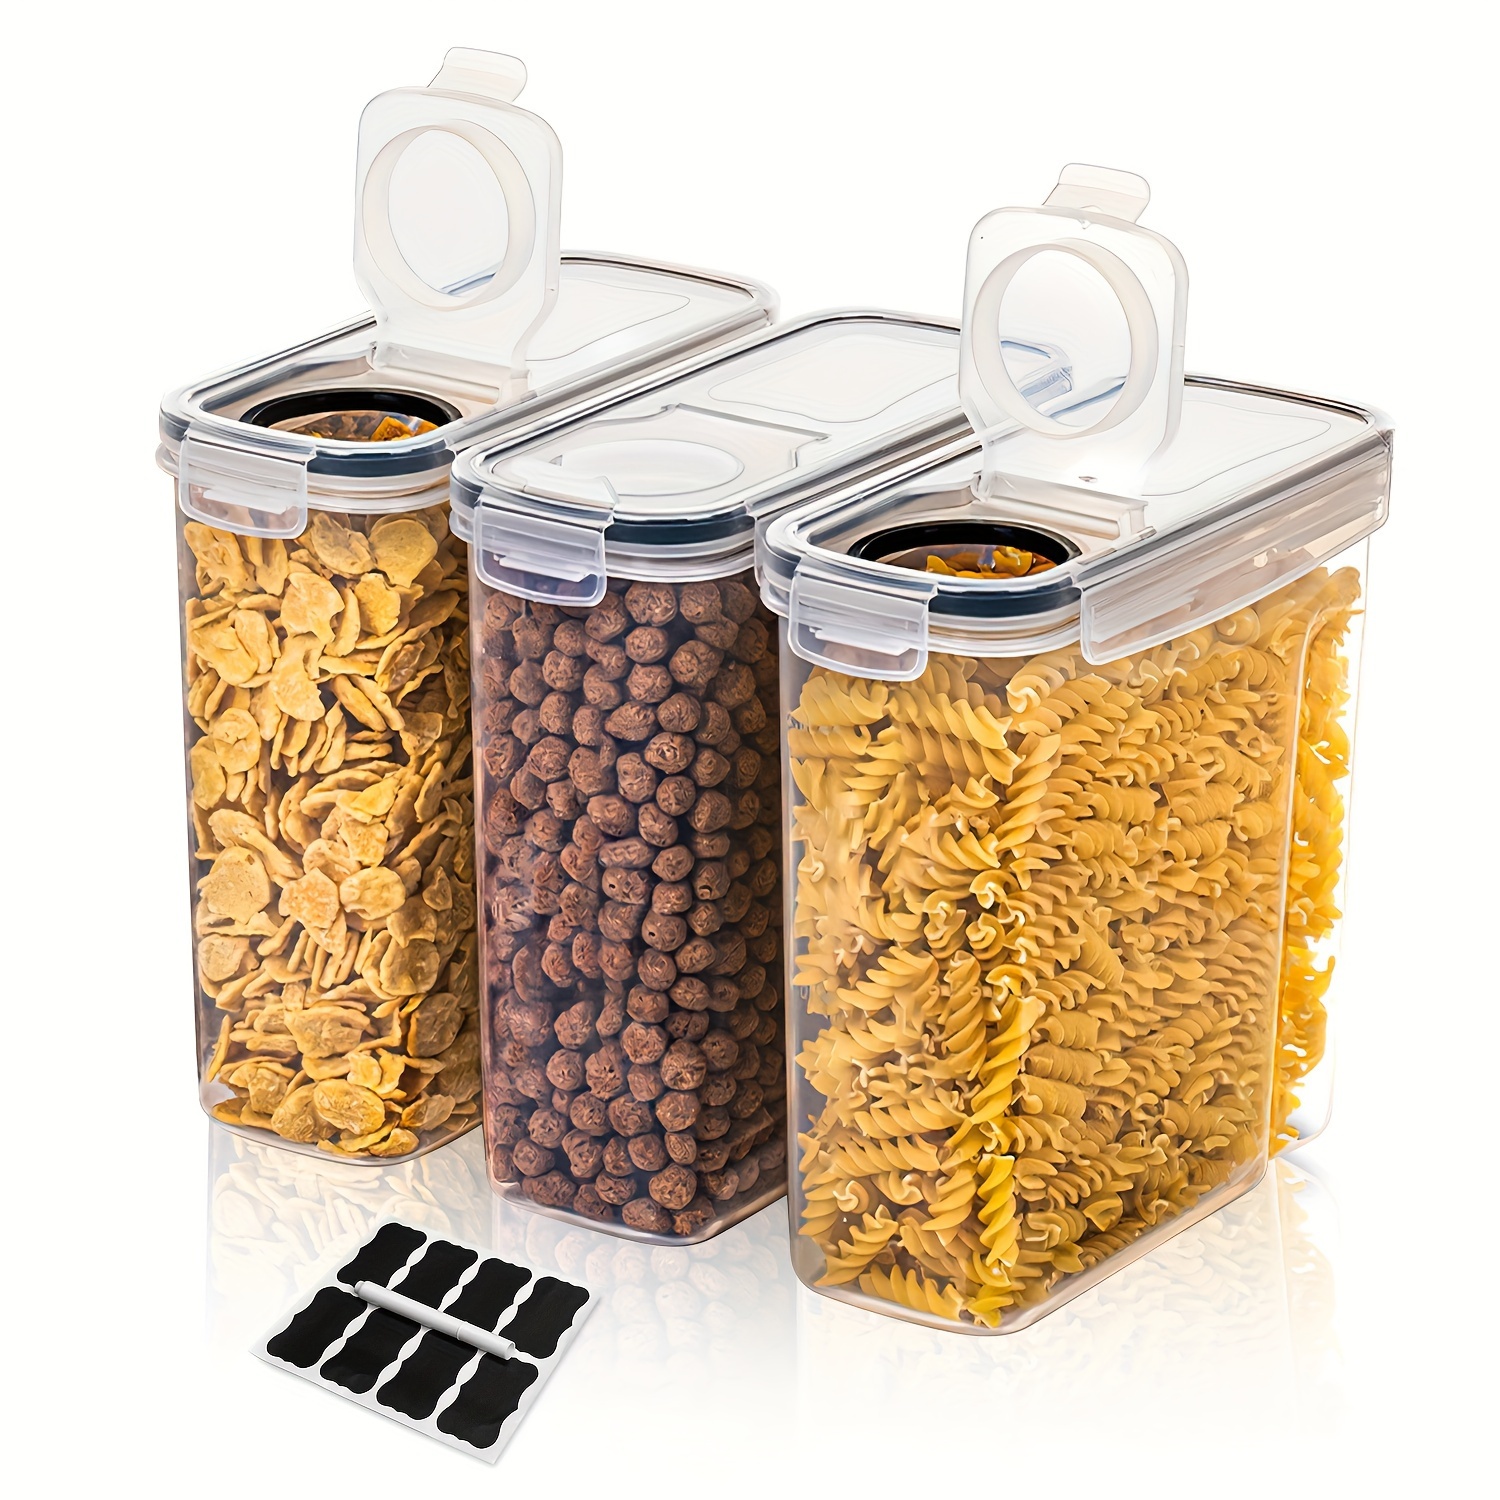 Dwllza Kitchen Cereal Containers Storage - 4 Pack Cereal Dispenser Airtight Food Storage Containers BPA-Free Pantry Organizat